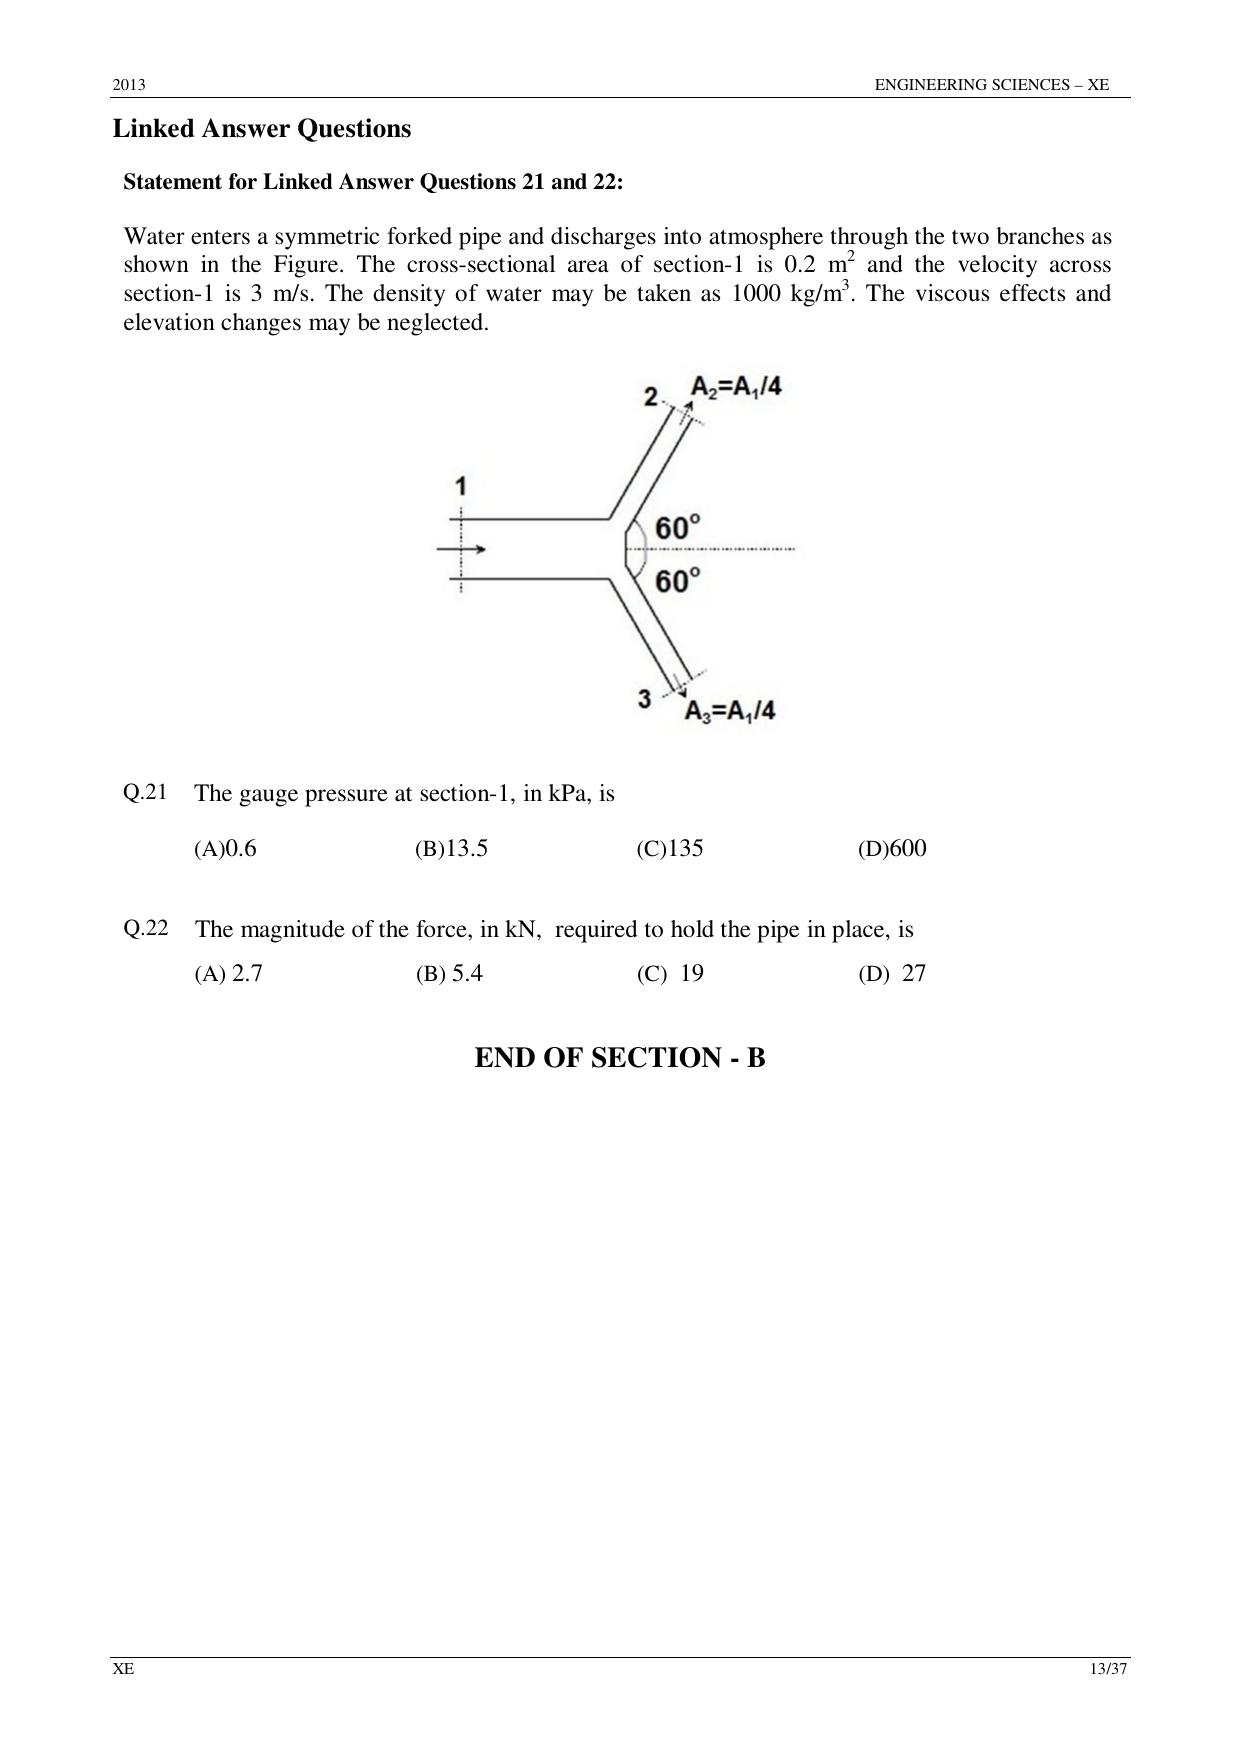 GATE 2013 Engineering Sciences (XE) Question Paper with Answer Key - Page 13